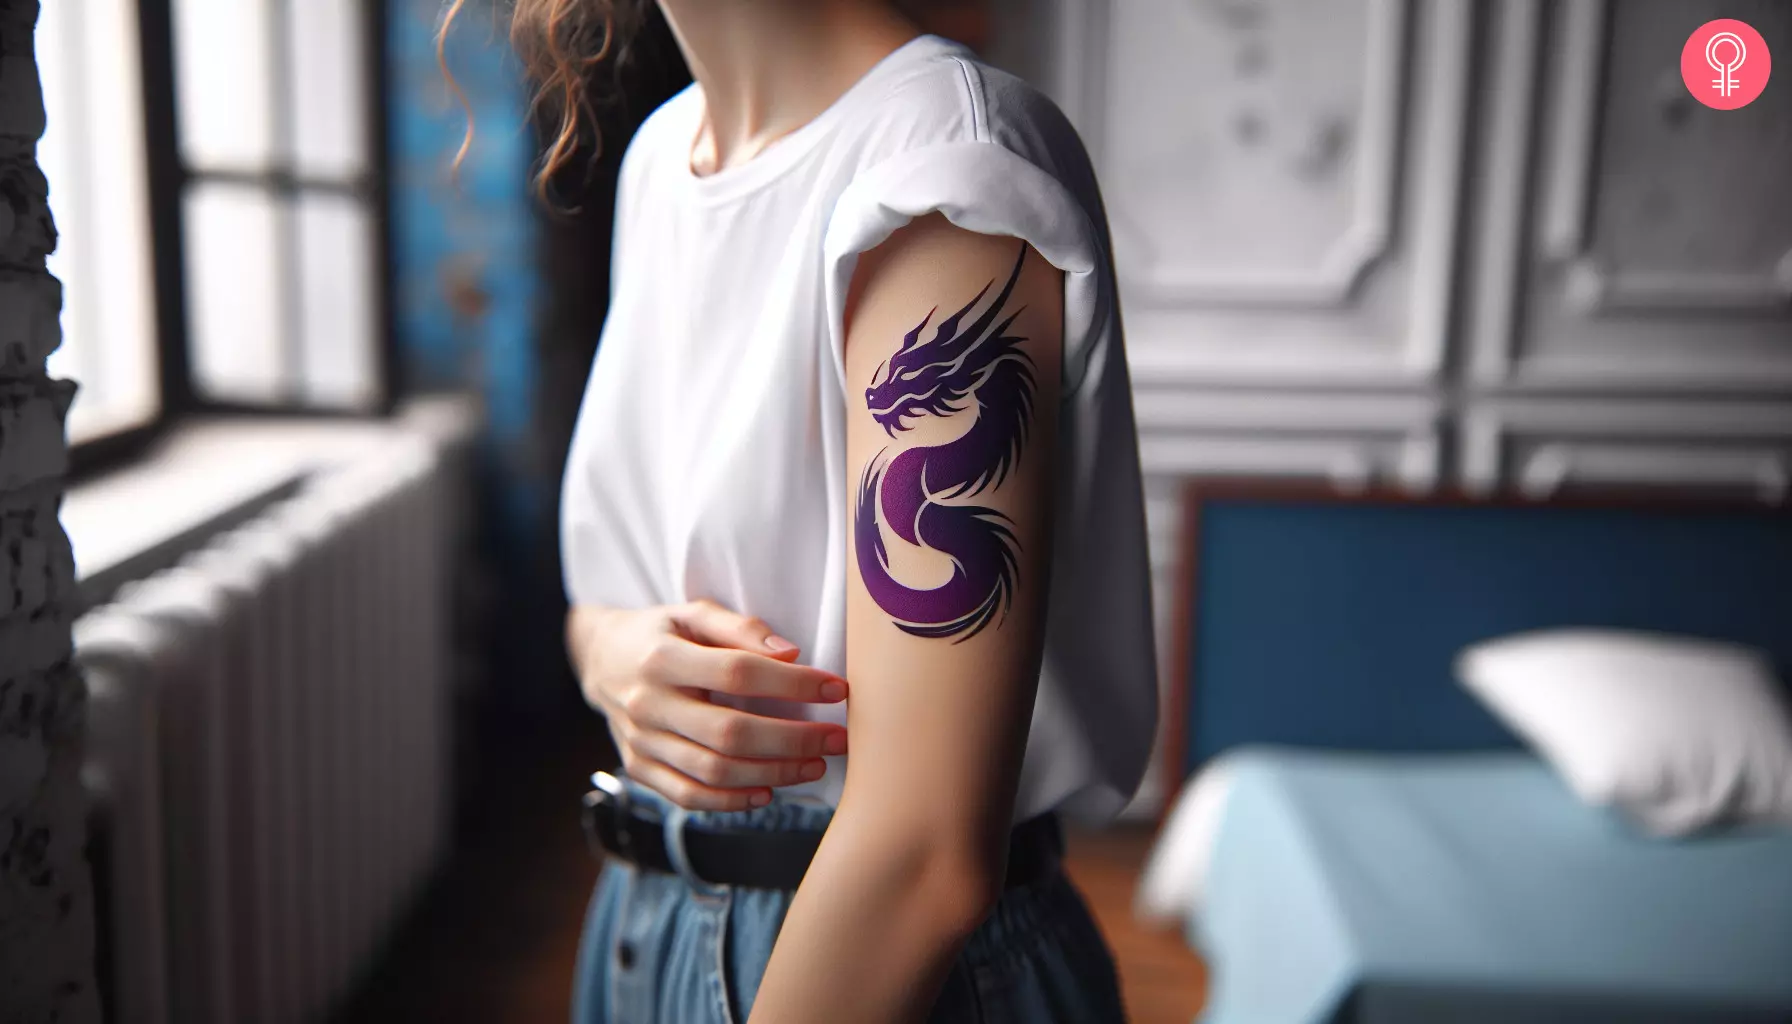 An abstract purple dragon tattoo on the upper arm